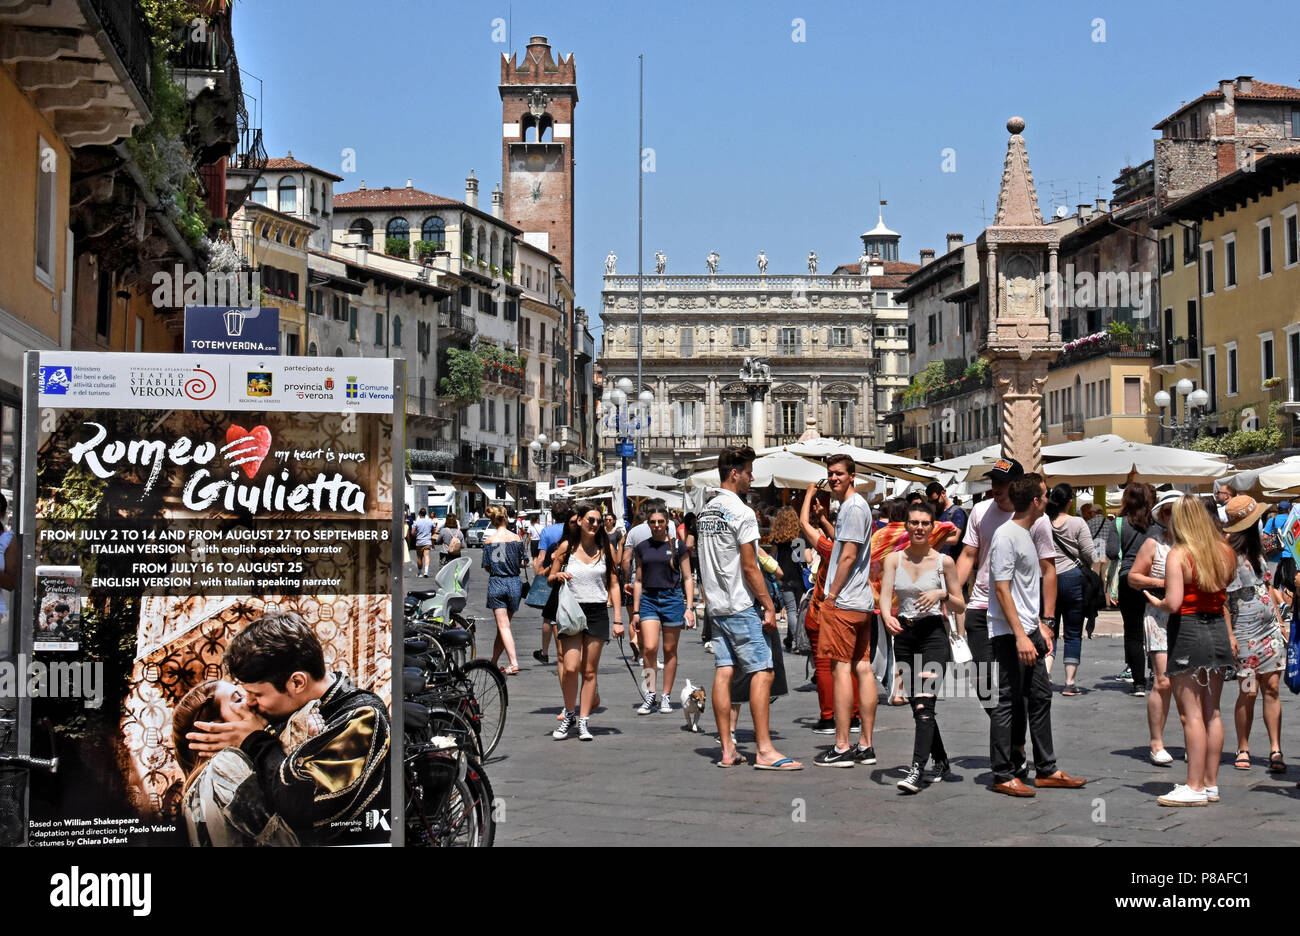 Market stalls in front of the Torre dei Lamberti in the Piazza delle Erbe, Verona ,Veneto, Italy, Italian. ( William Shakespeare's Romeo and Juliet, first published in 1597, is considered to be the first romantic tragedy ever written. ) Stock Photo